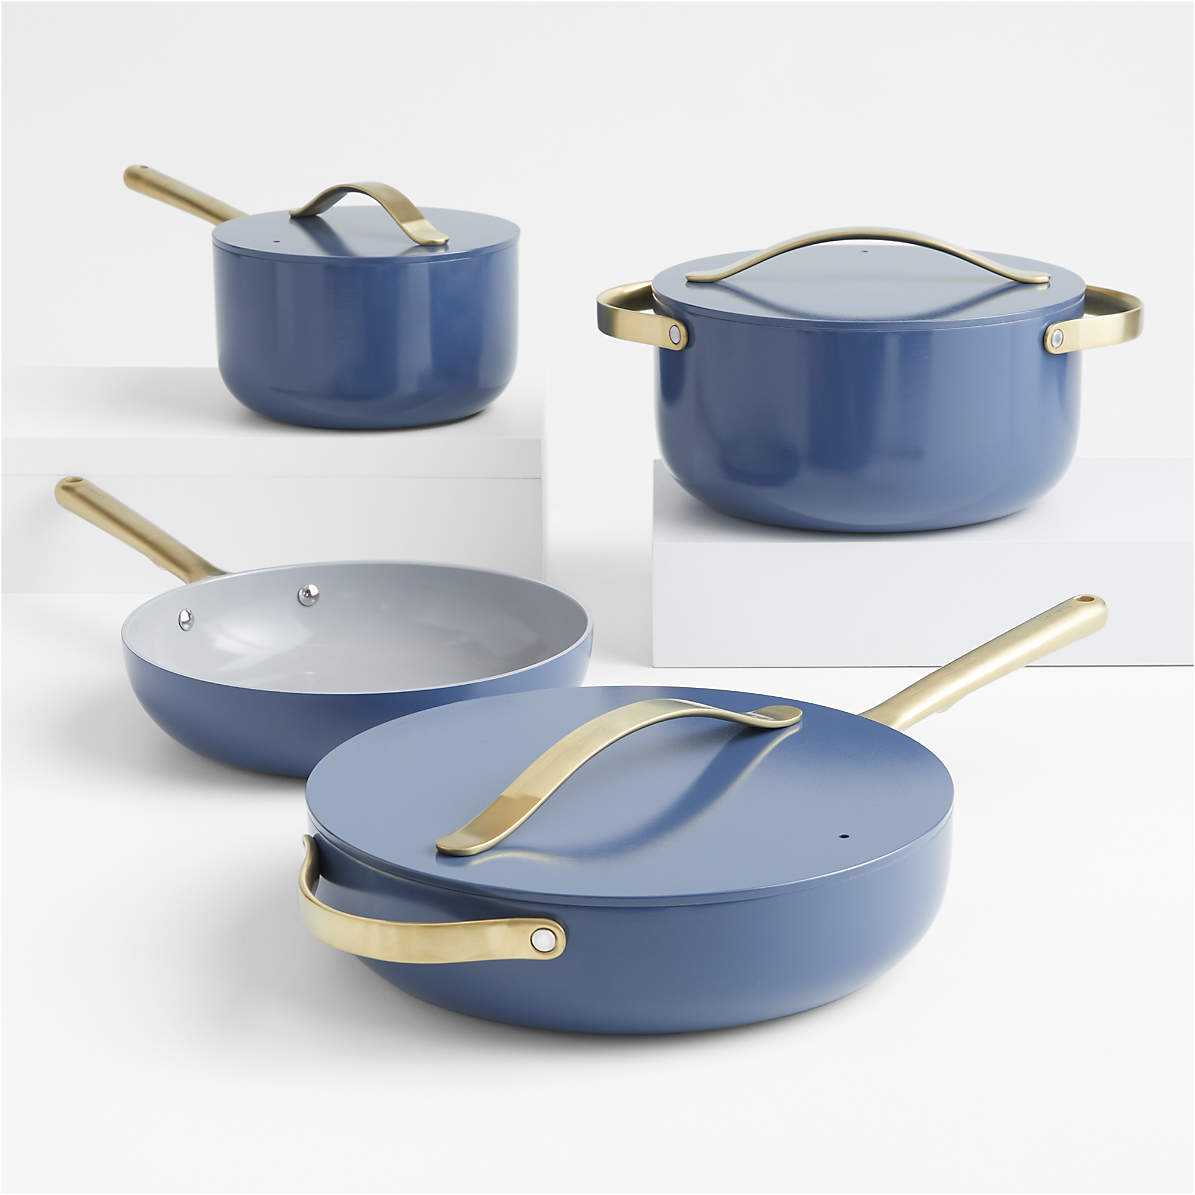 https://cb.scene7.com/is/image/Crate/CarawayHmNSCrCkw7pSphSSS22/$web_pdp_main_carousel_zoom_med$/220214151306/caraway-home-sapphire-7-piece-ceramic-non-stick-cookware-set-with-gold-hardware.jpg